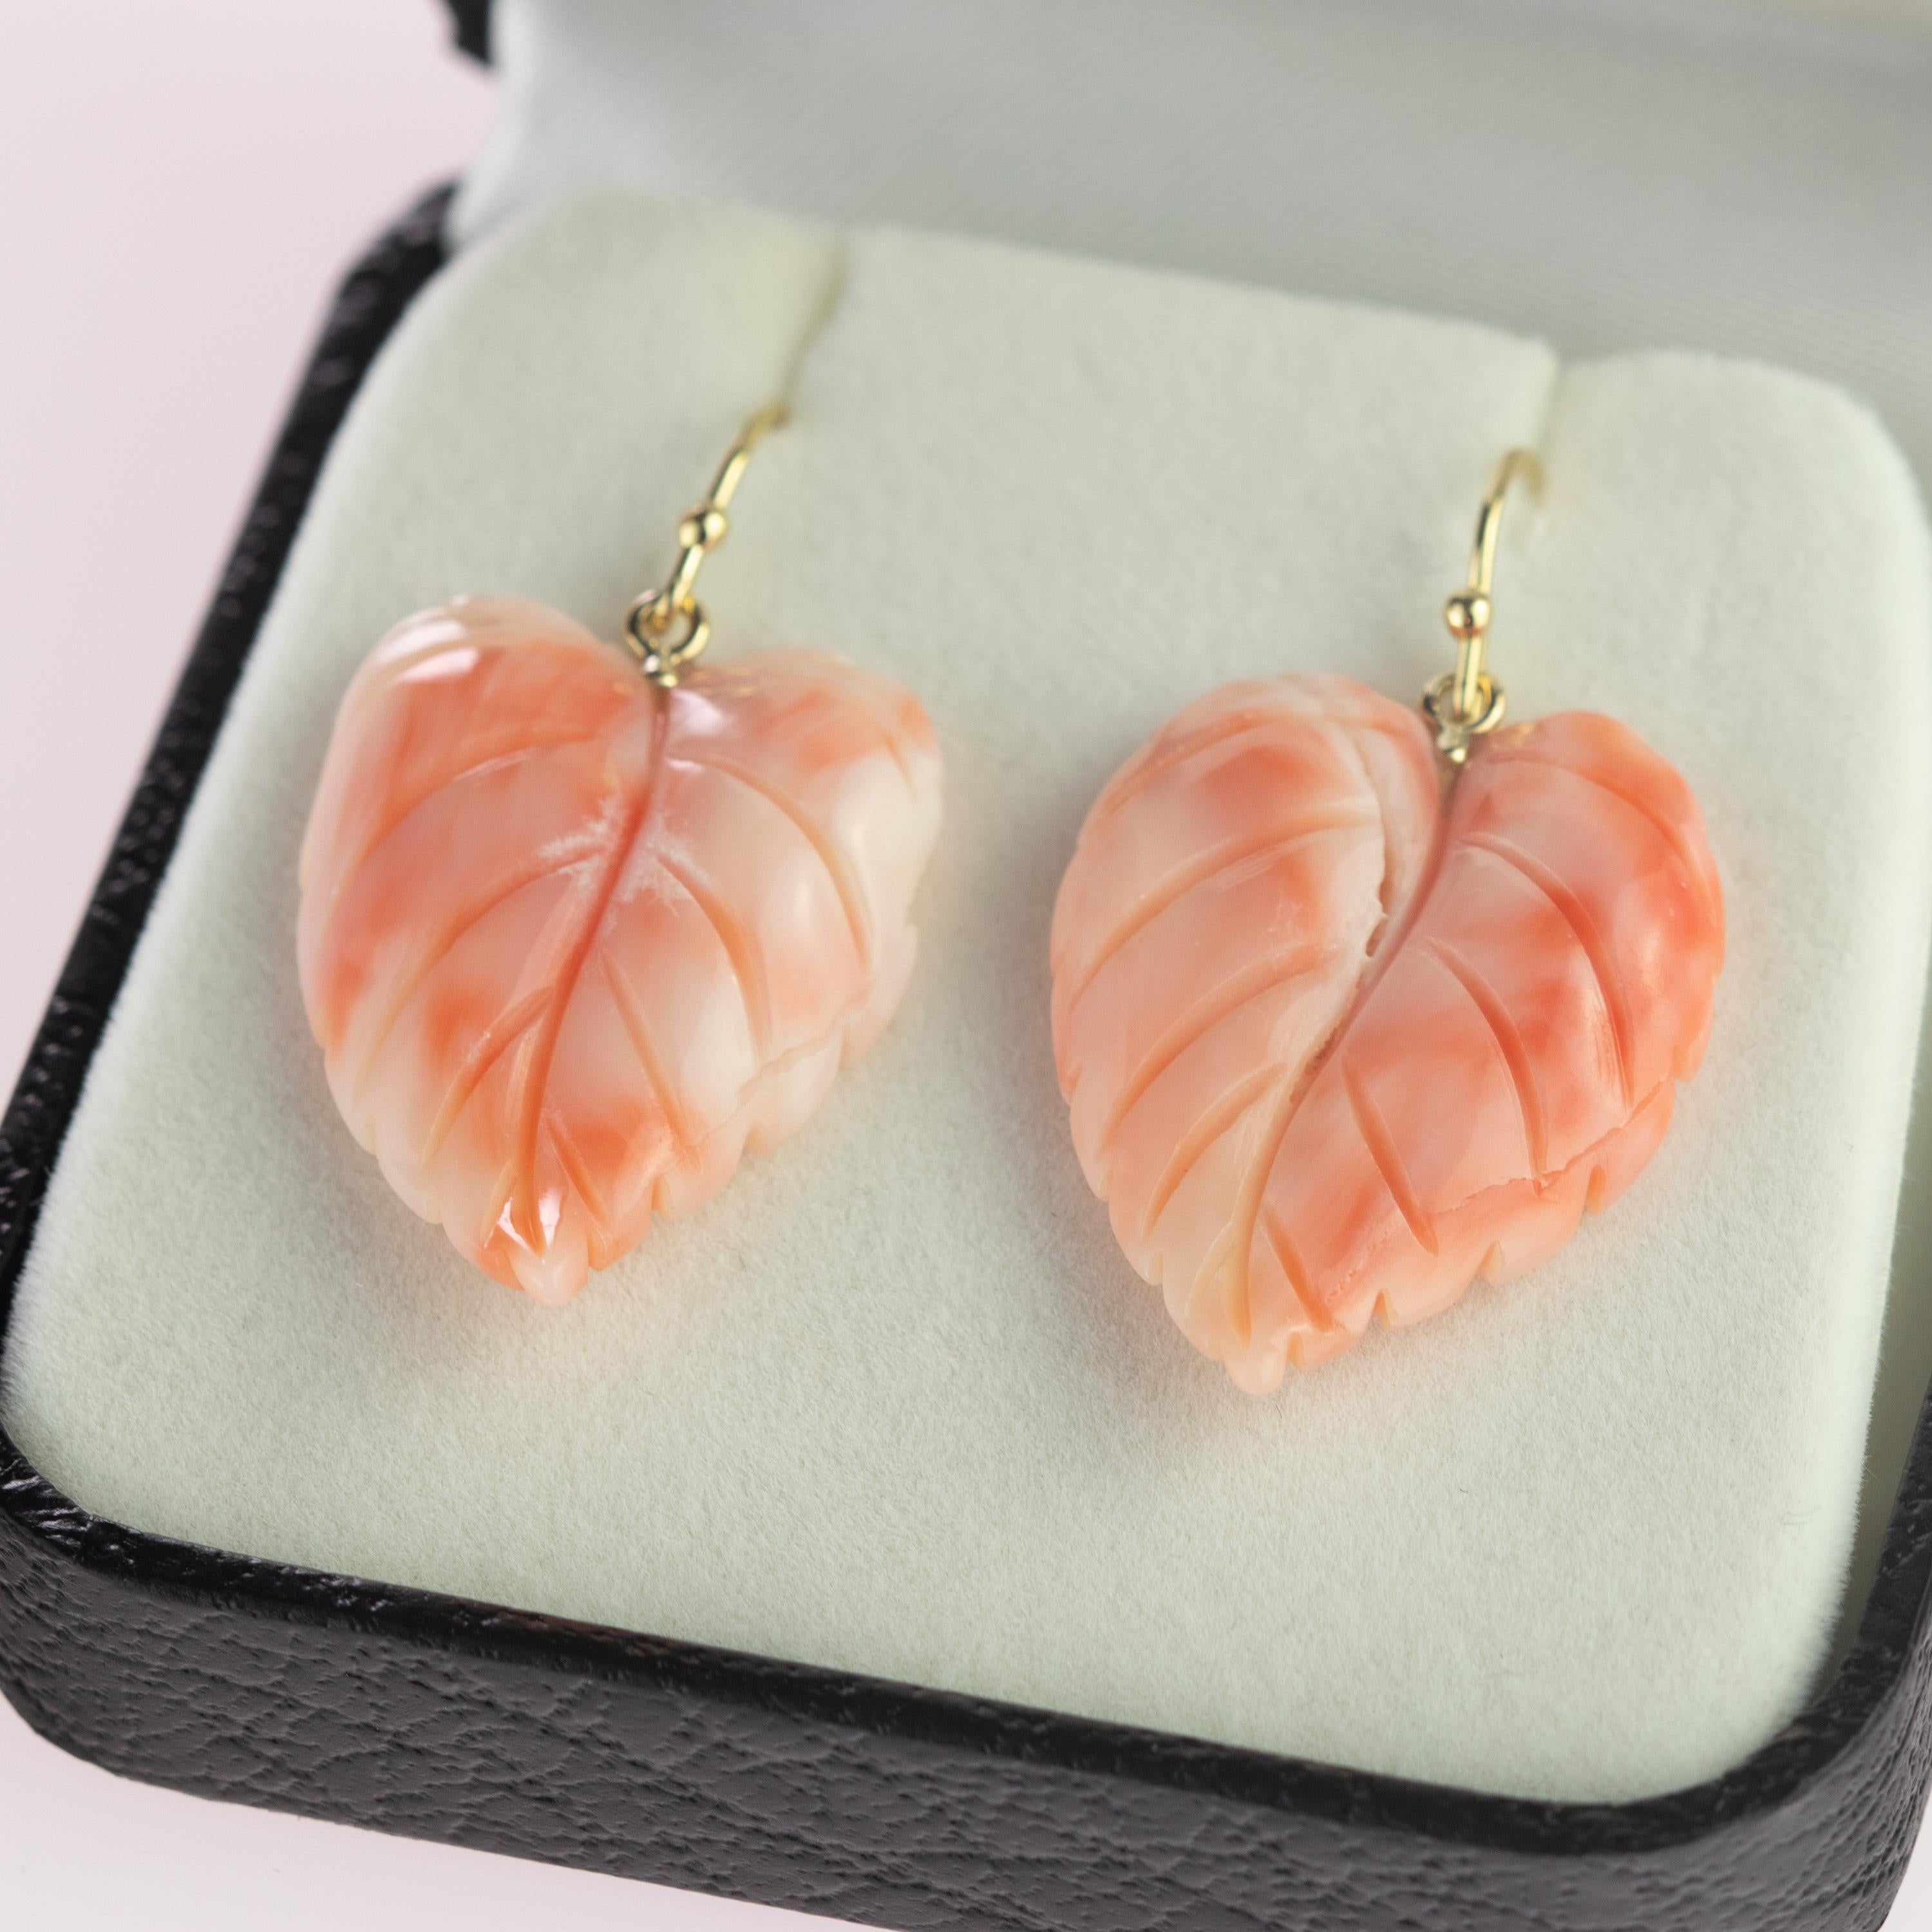 This stunning masterpiece with high quality craftsmanship was born in the Intini Jewels workshop. Our designers add all the italian modern style and glamour in one exquisite piece. Stunning crafted coral leaves, hanging from 18 karat yellow